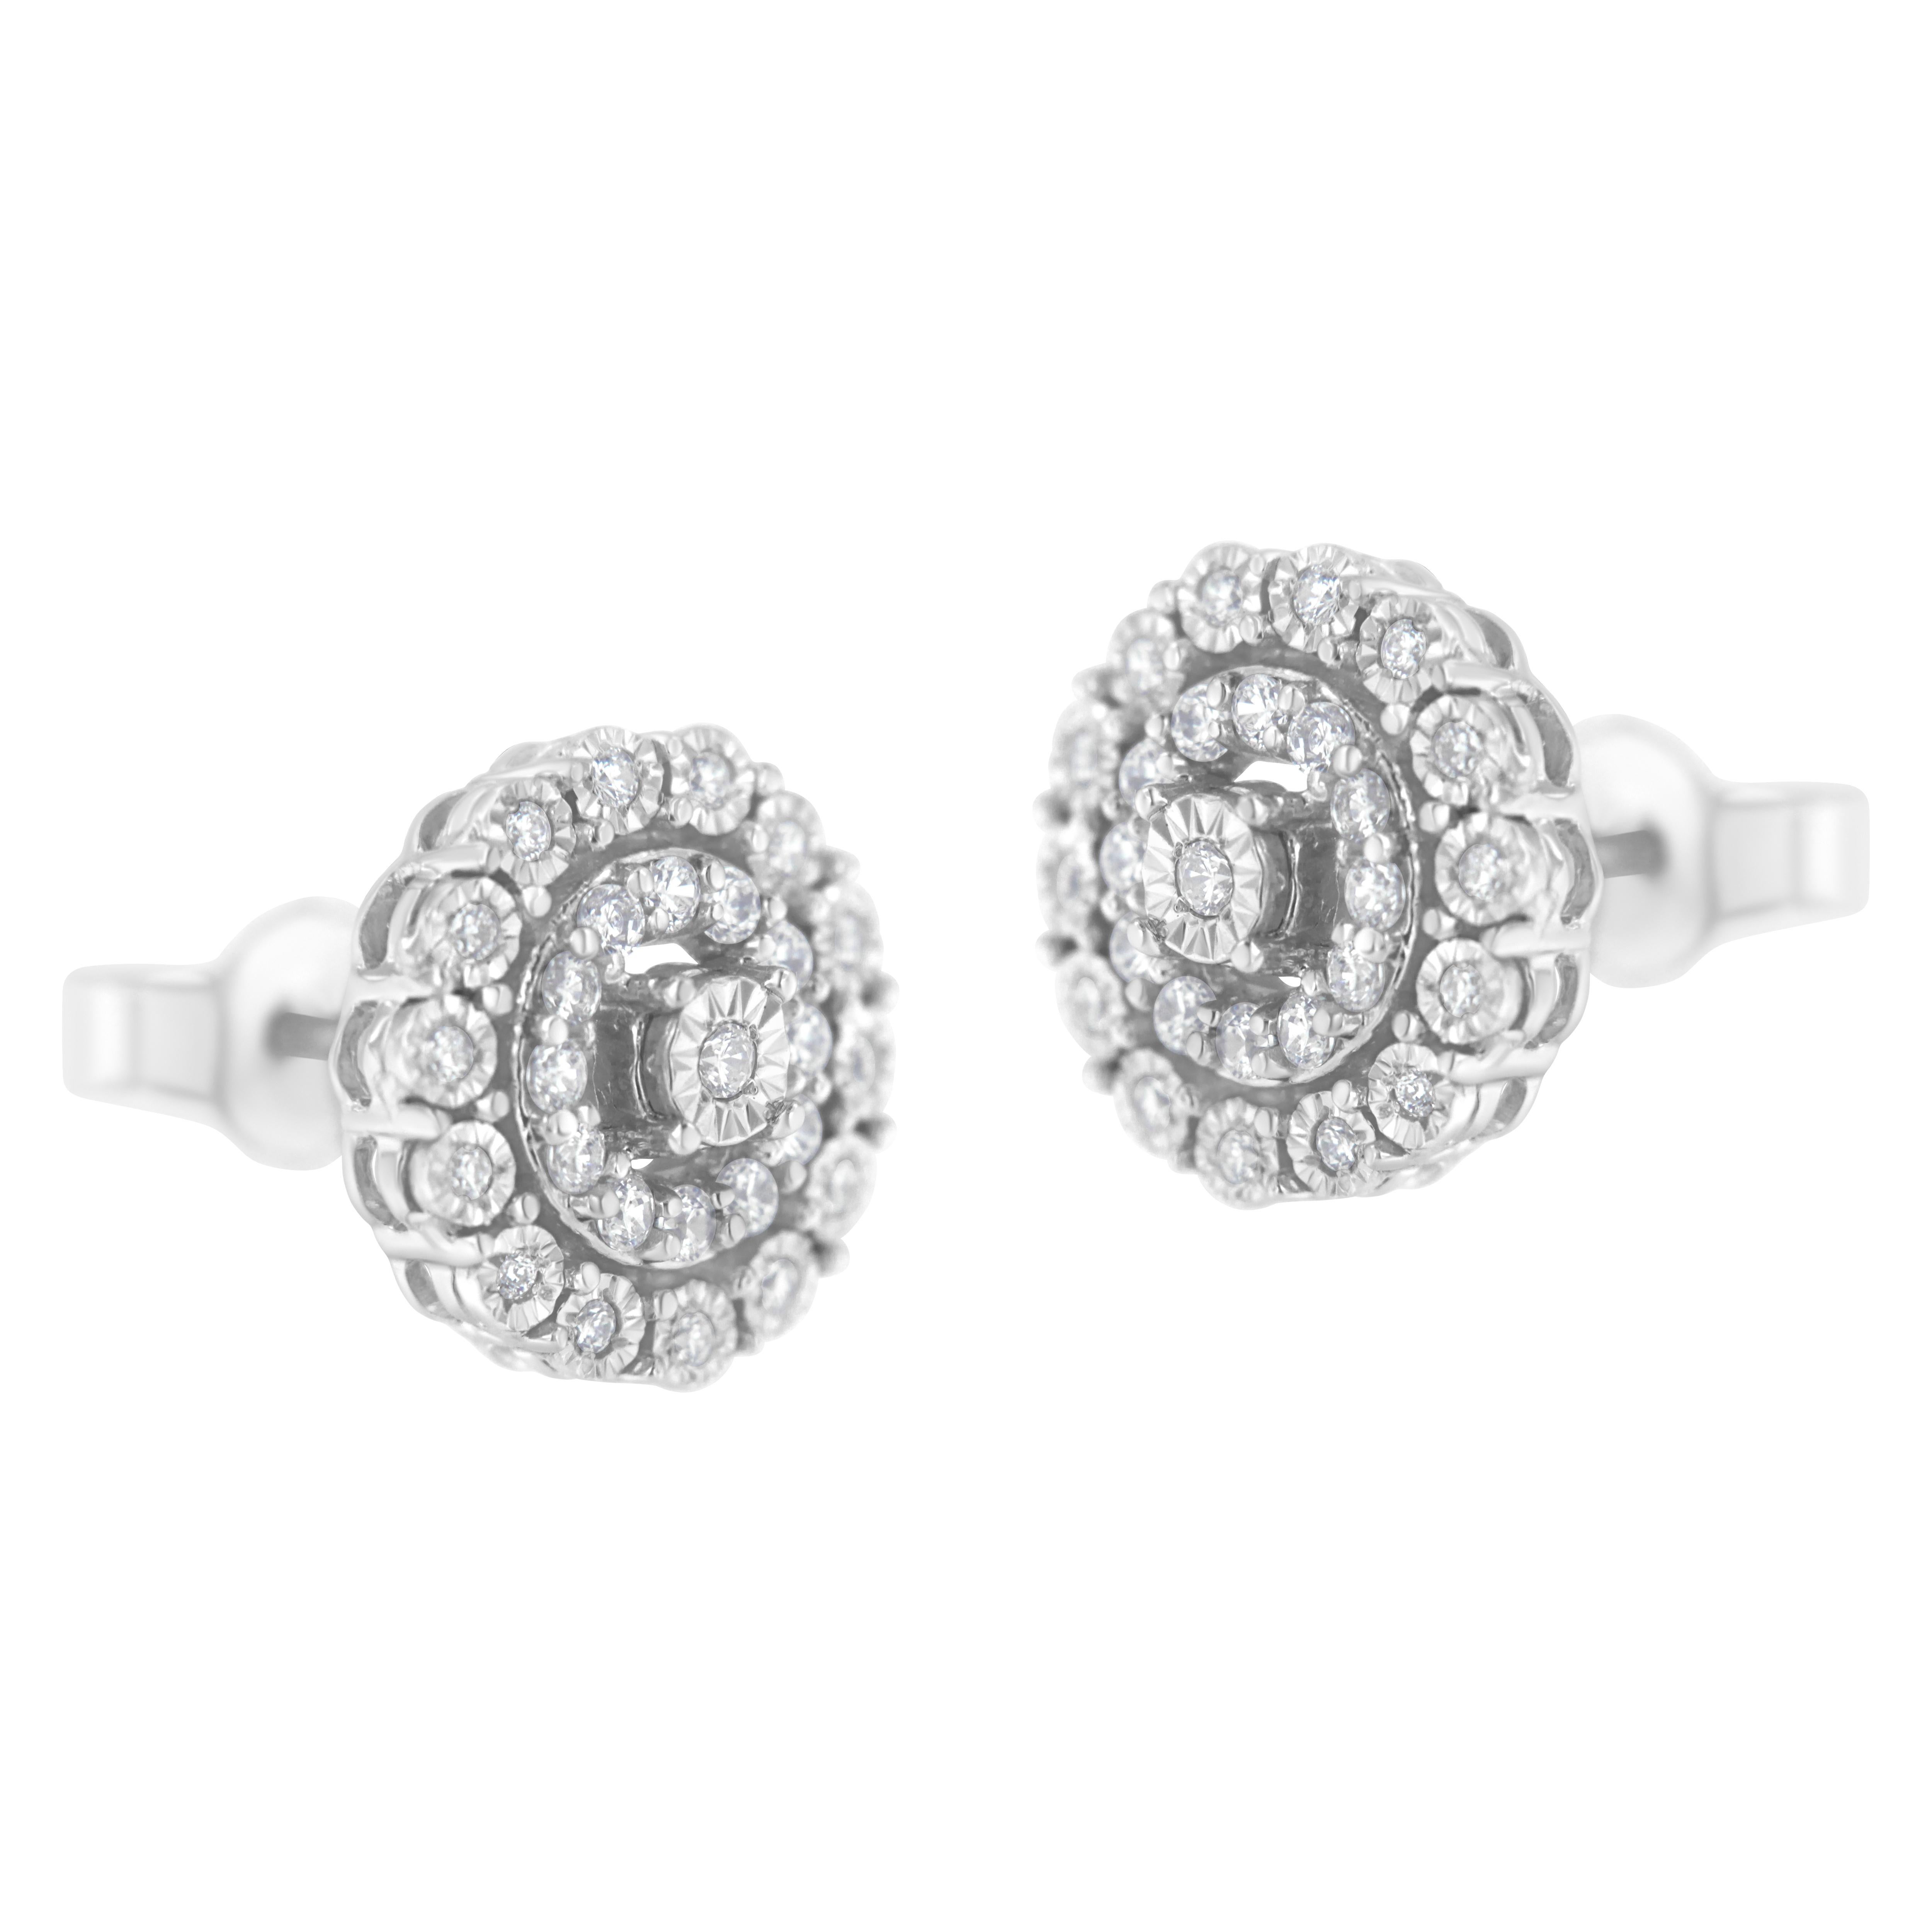 Contemporary 10Kt White Gold 1/2 Carat Double Halo Brilliant Round-Cut Diamond Stud Earrings